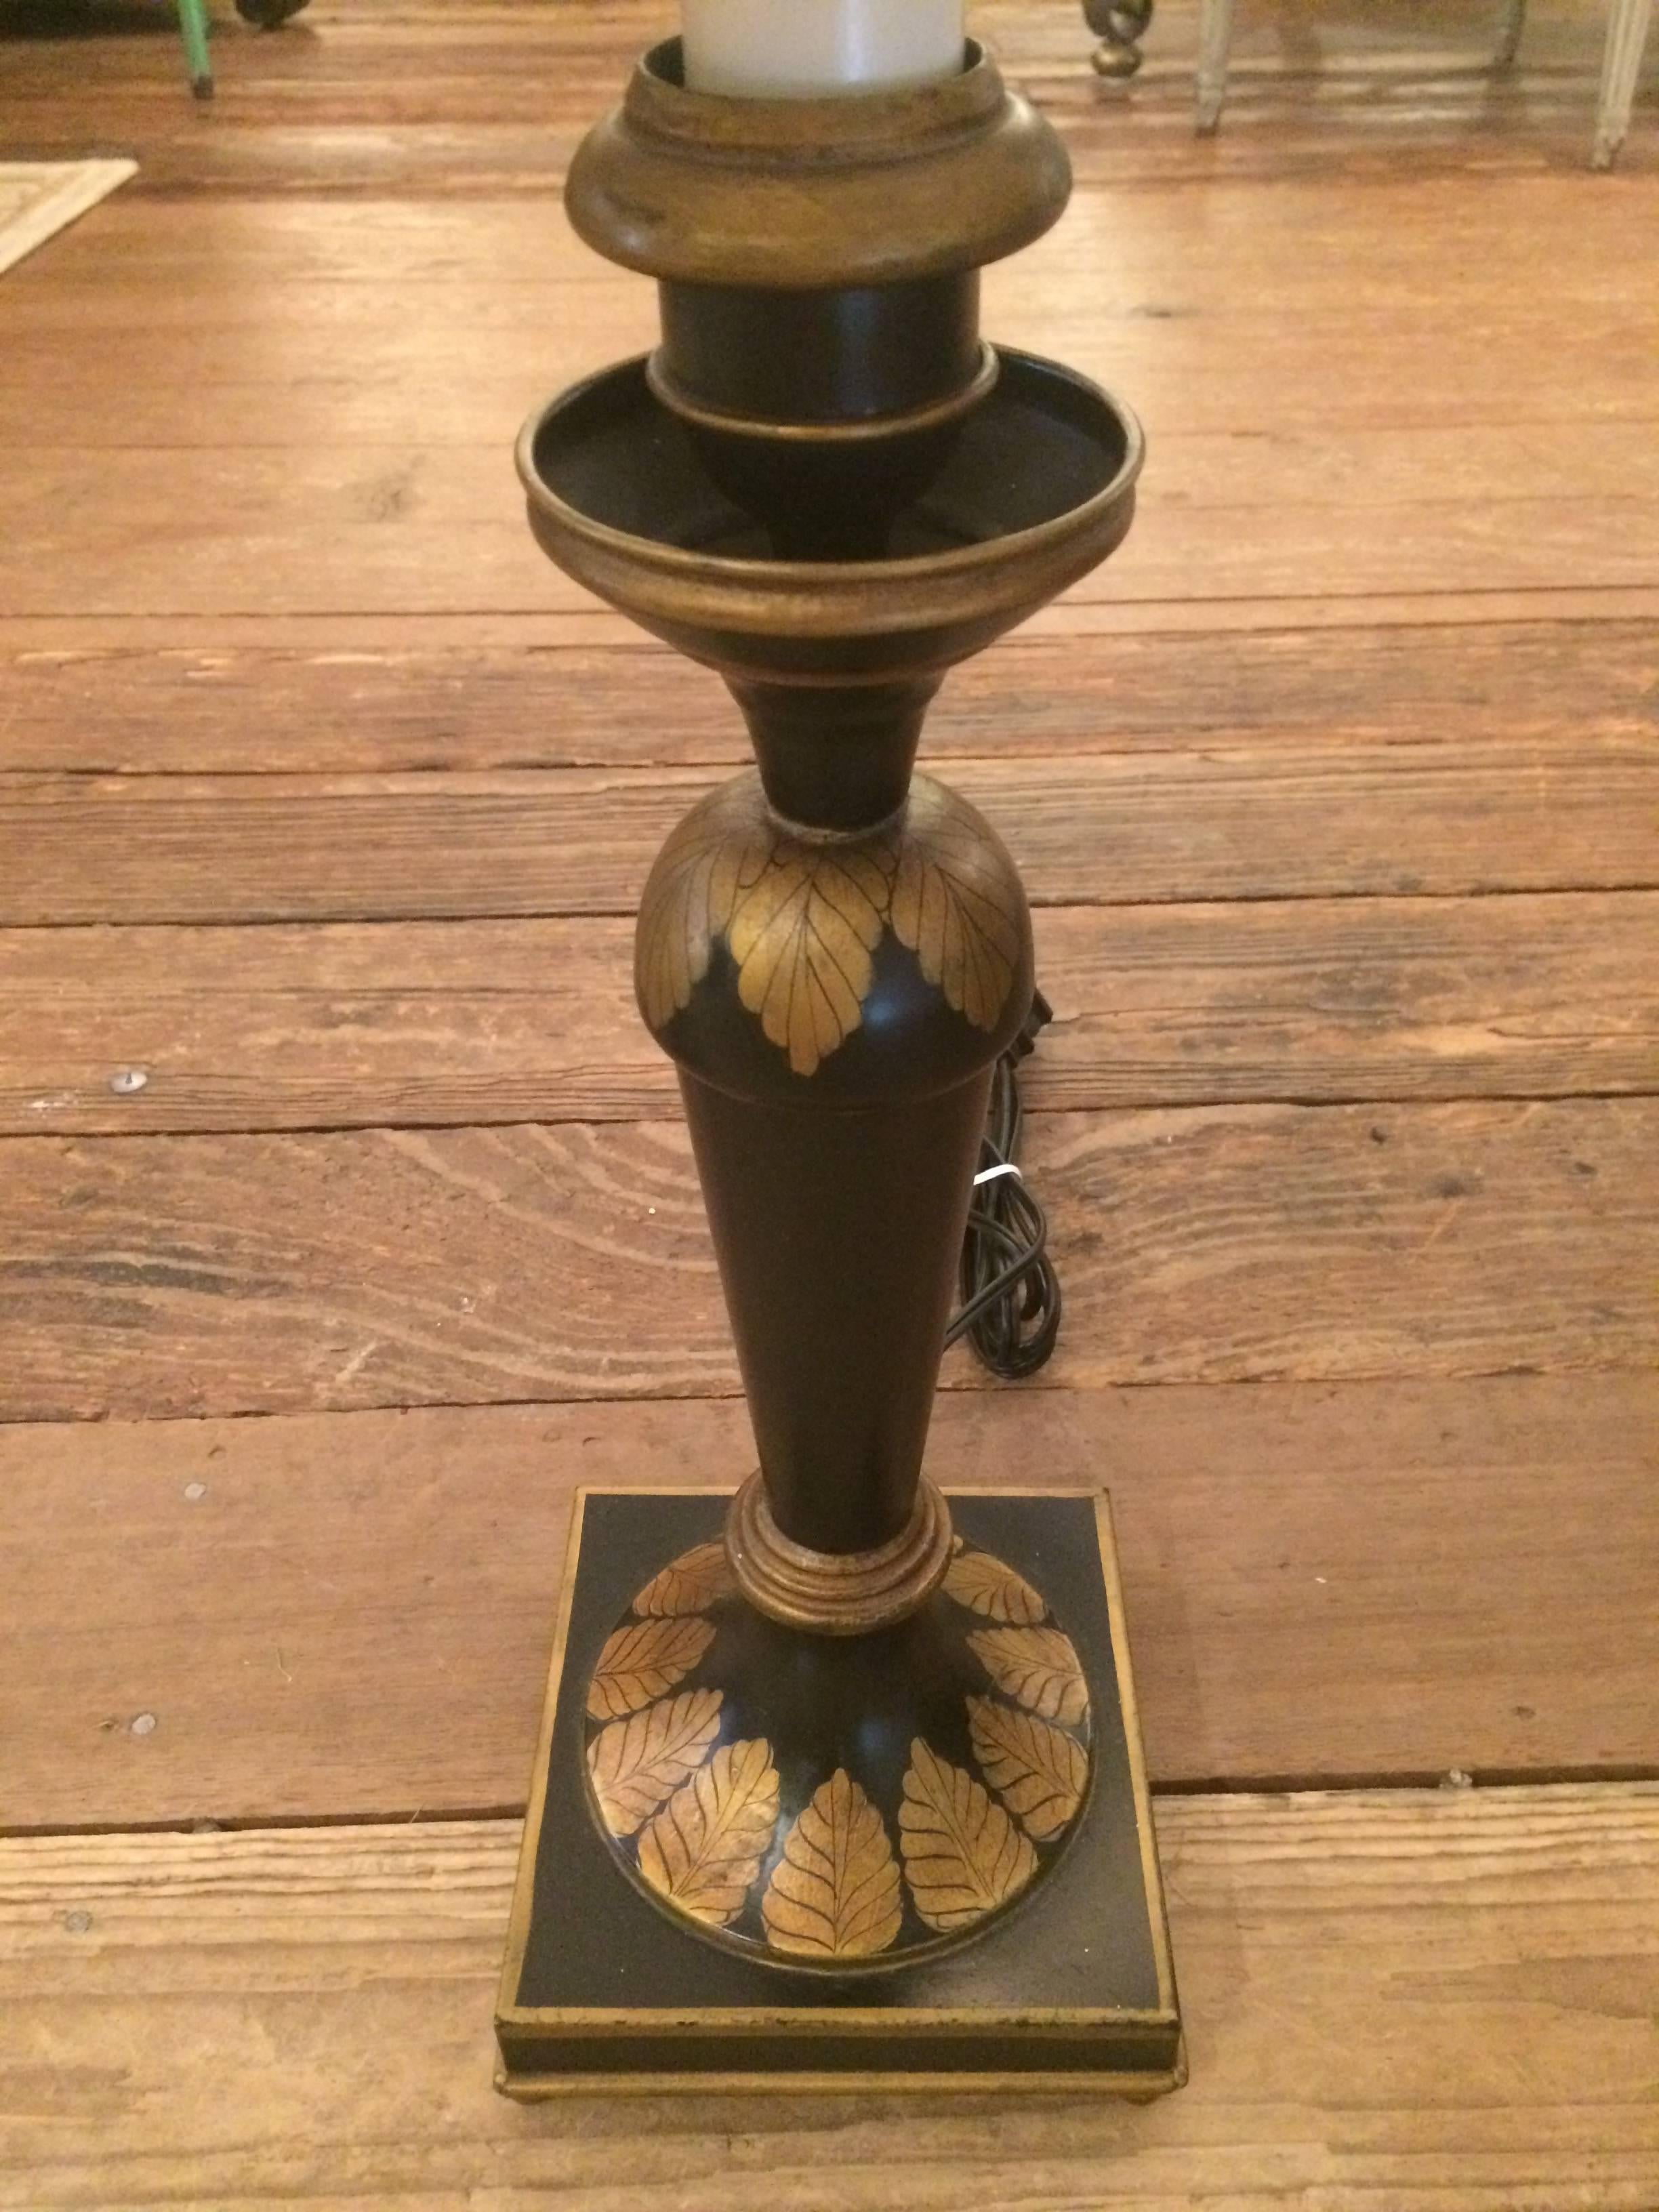 Two elegant matching candlestick shaped black lamps with gold decorative painting. Custom shades, wired and ready to add light and beauty to any room. Base is 5.5 square.